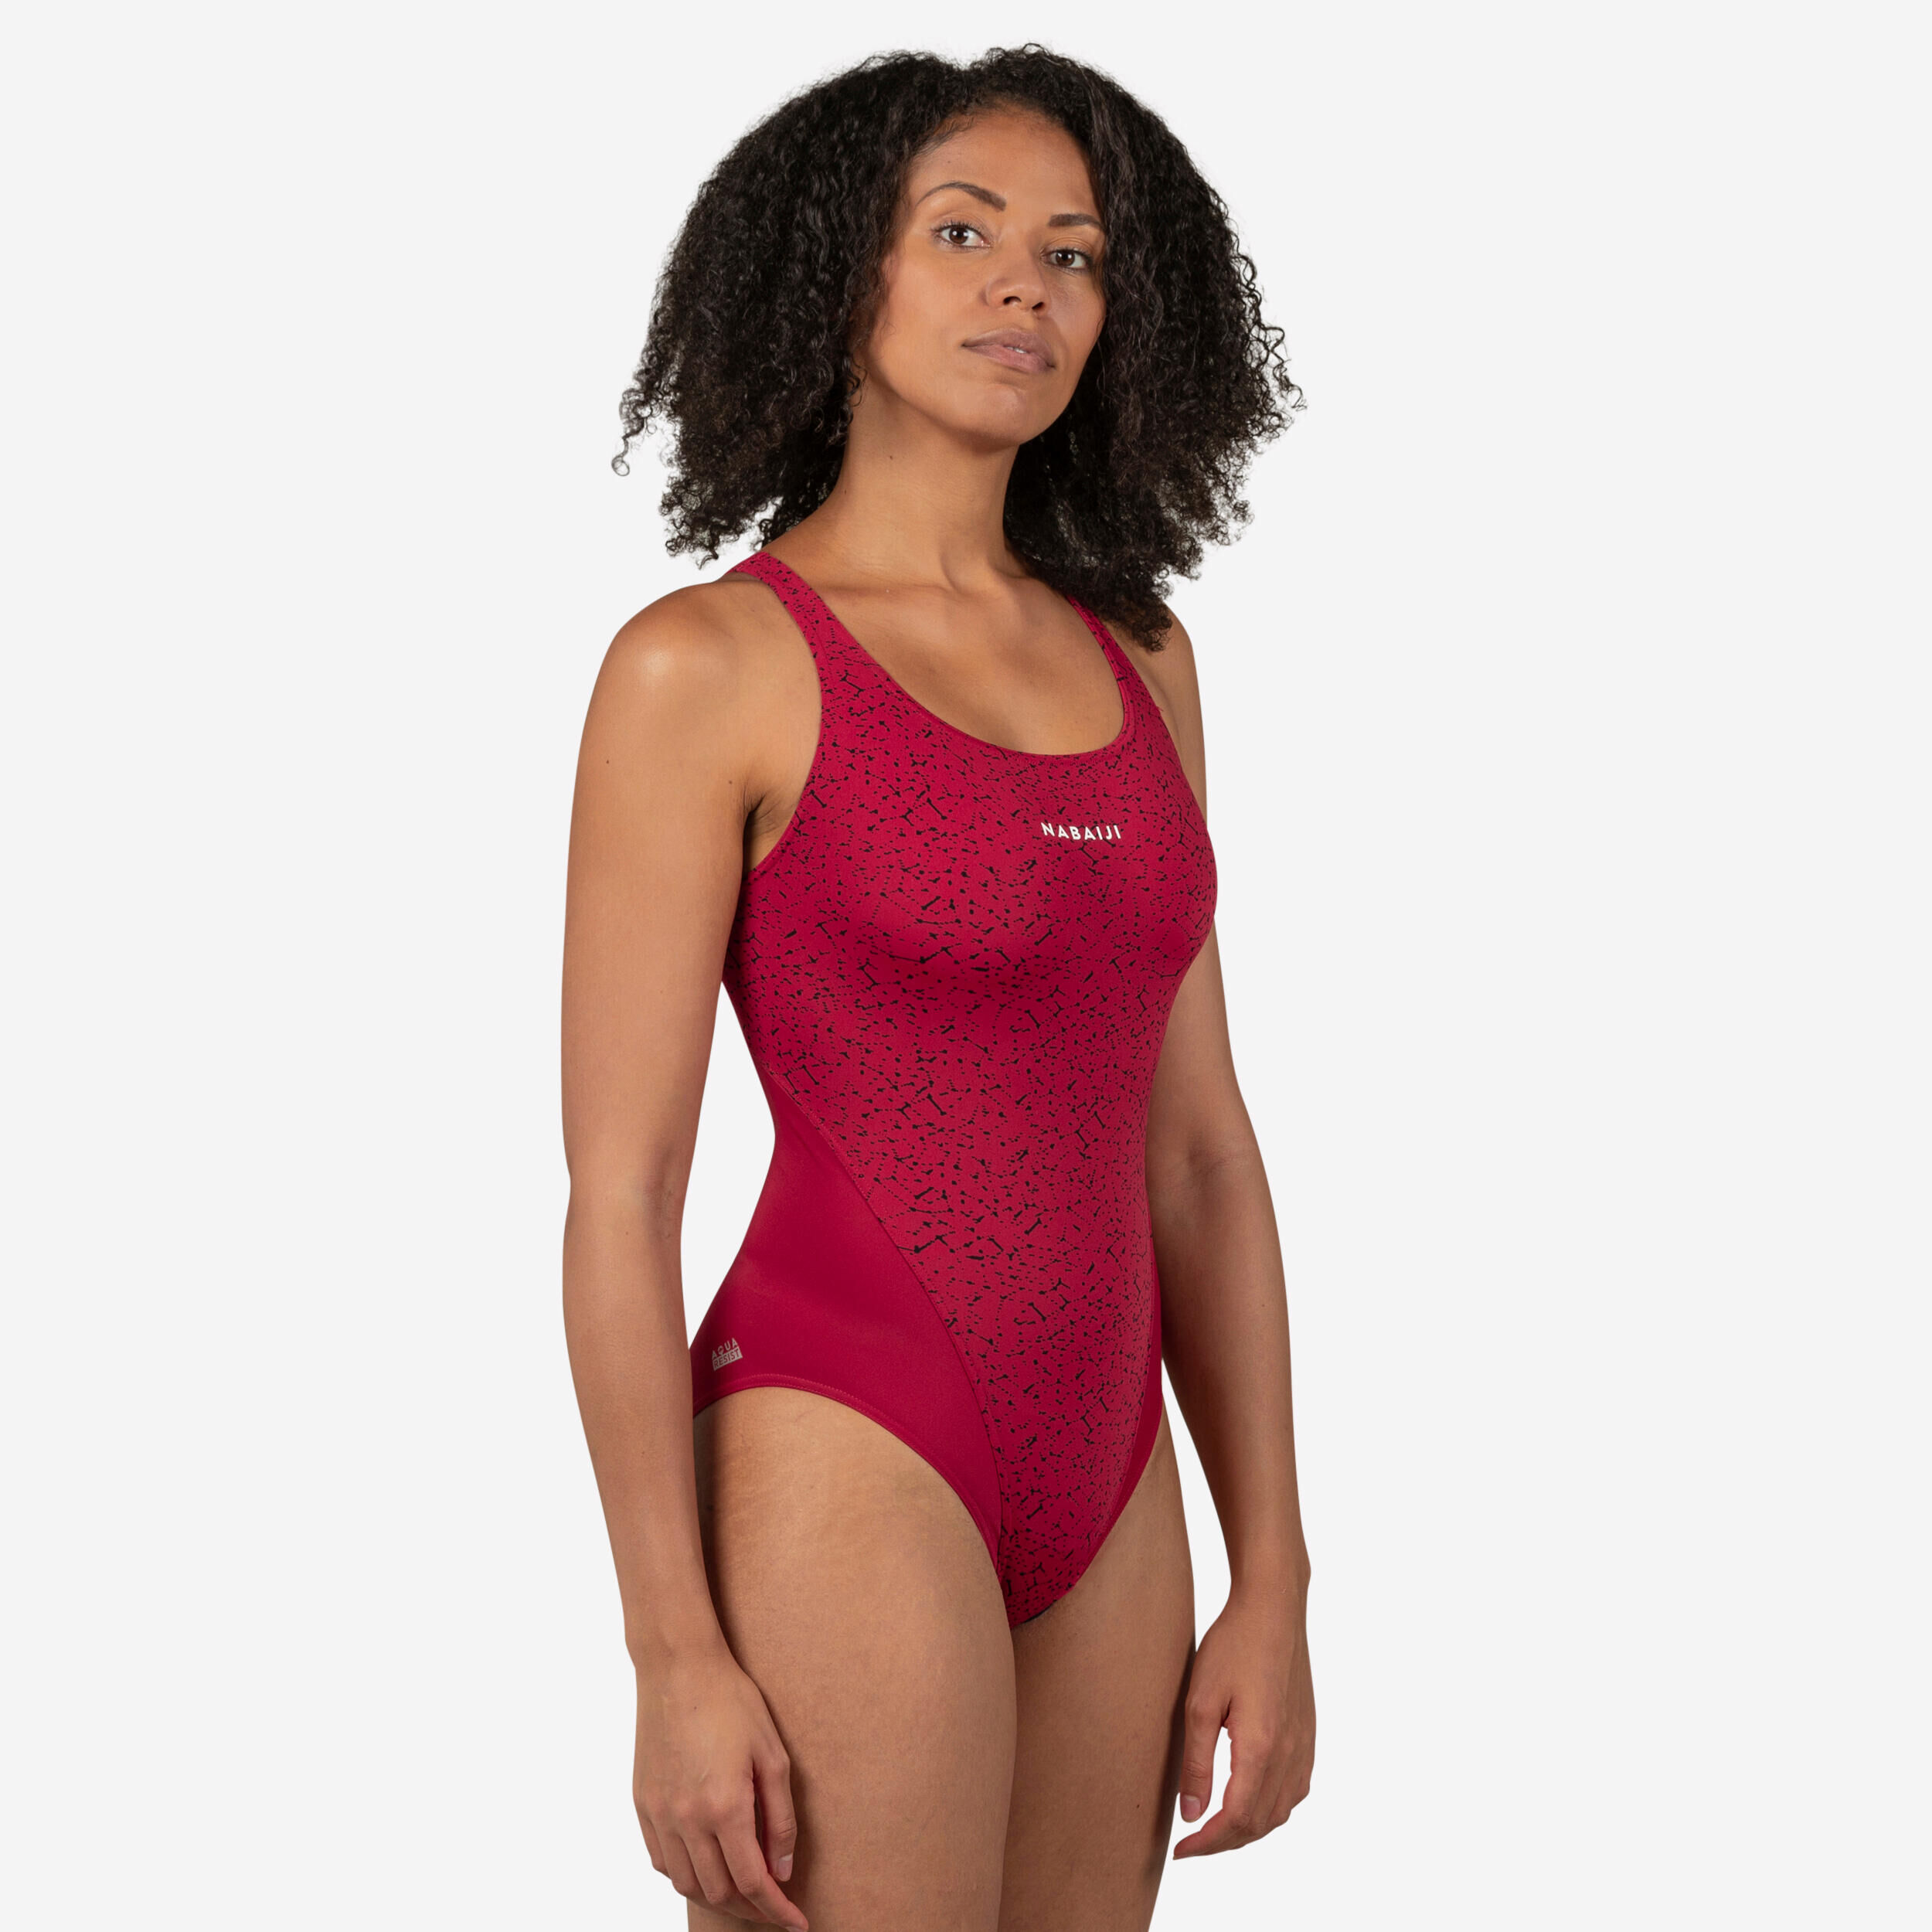 Women's 1-Piece Swimsuit - Pearl Red - Red - Nabaiji - Decathlon